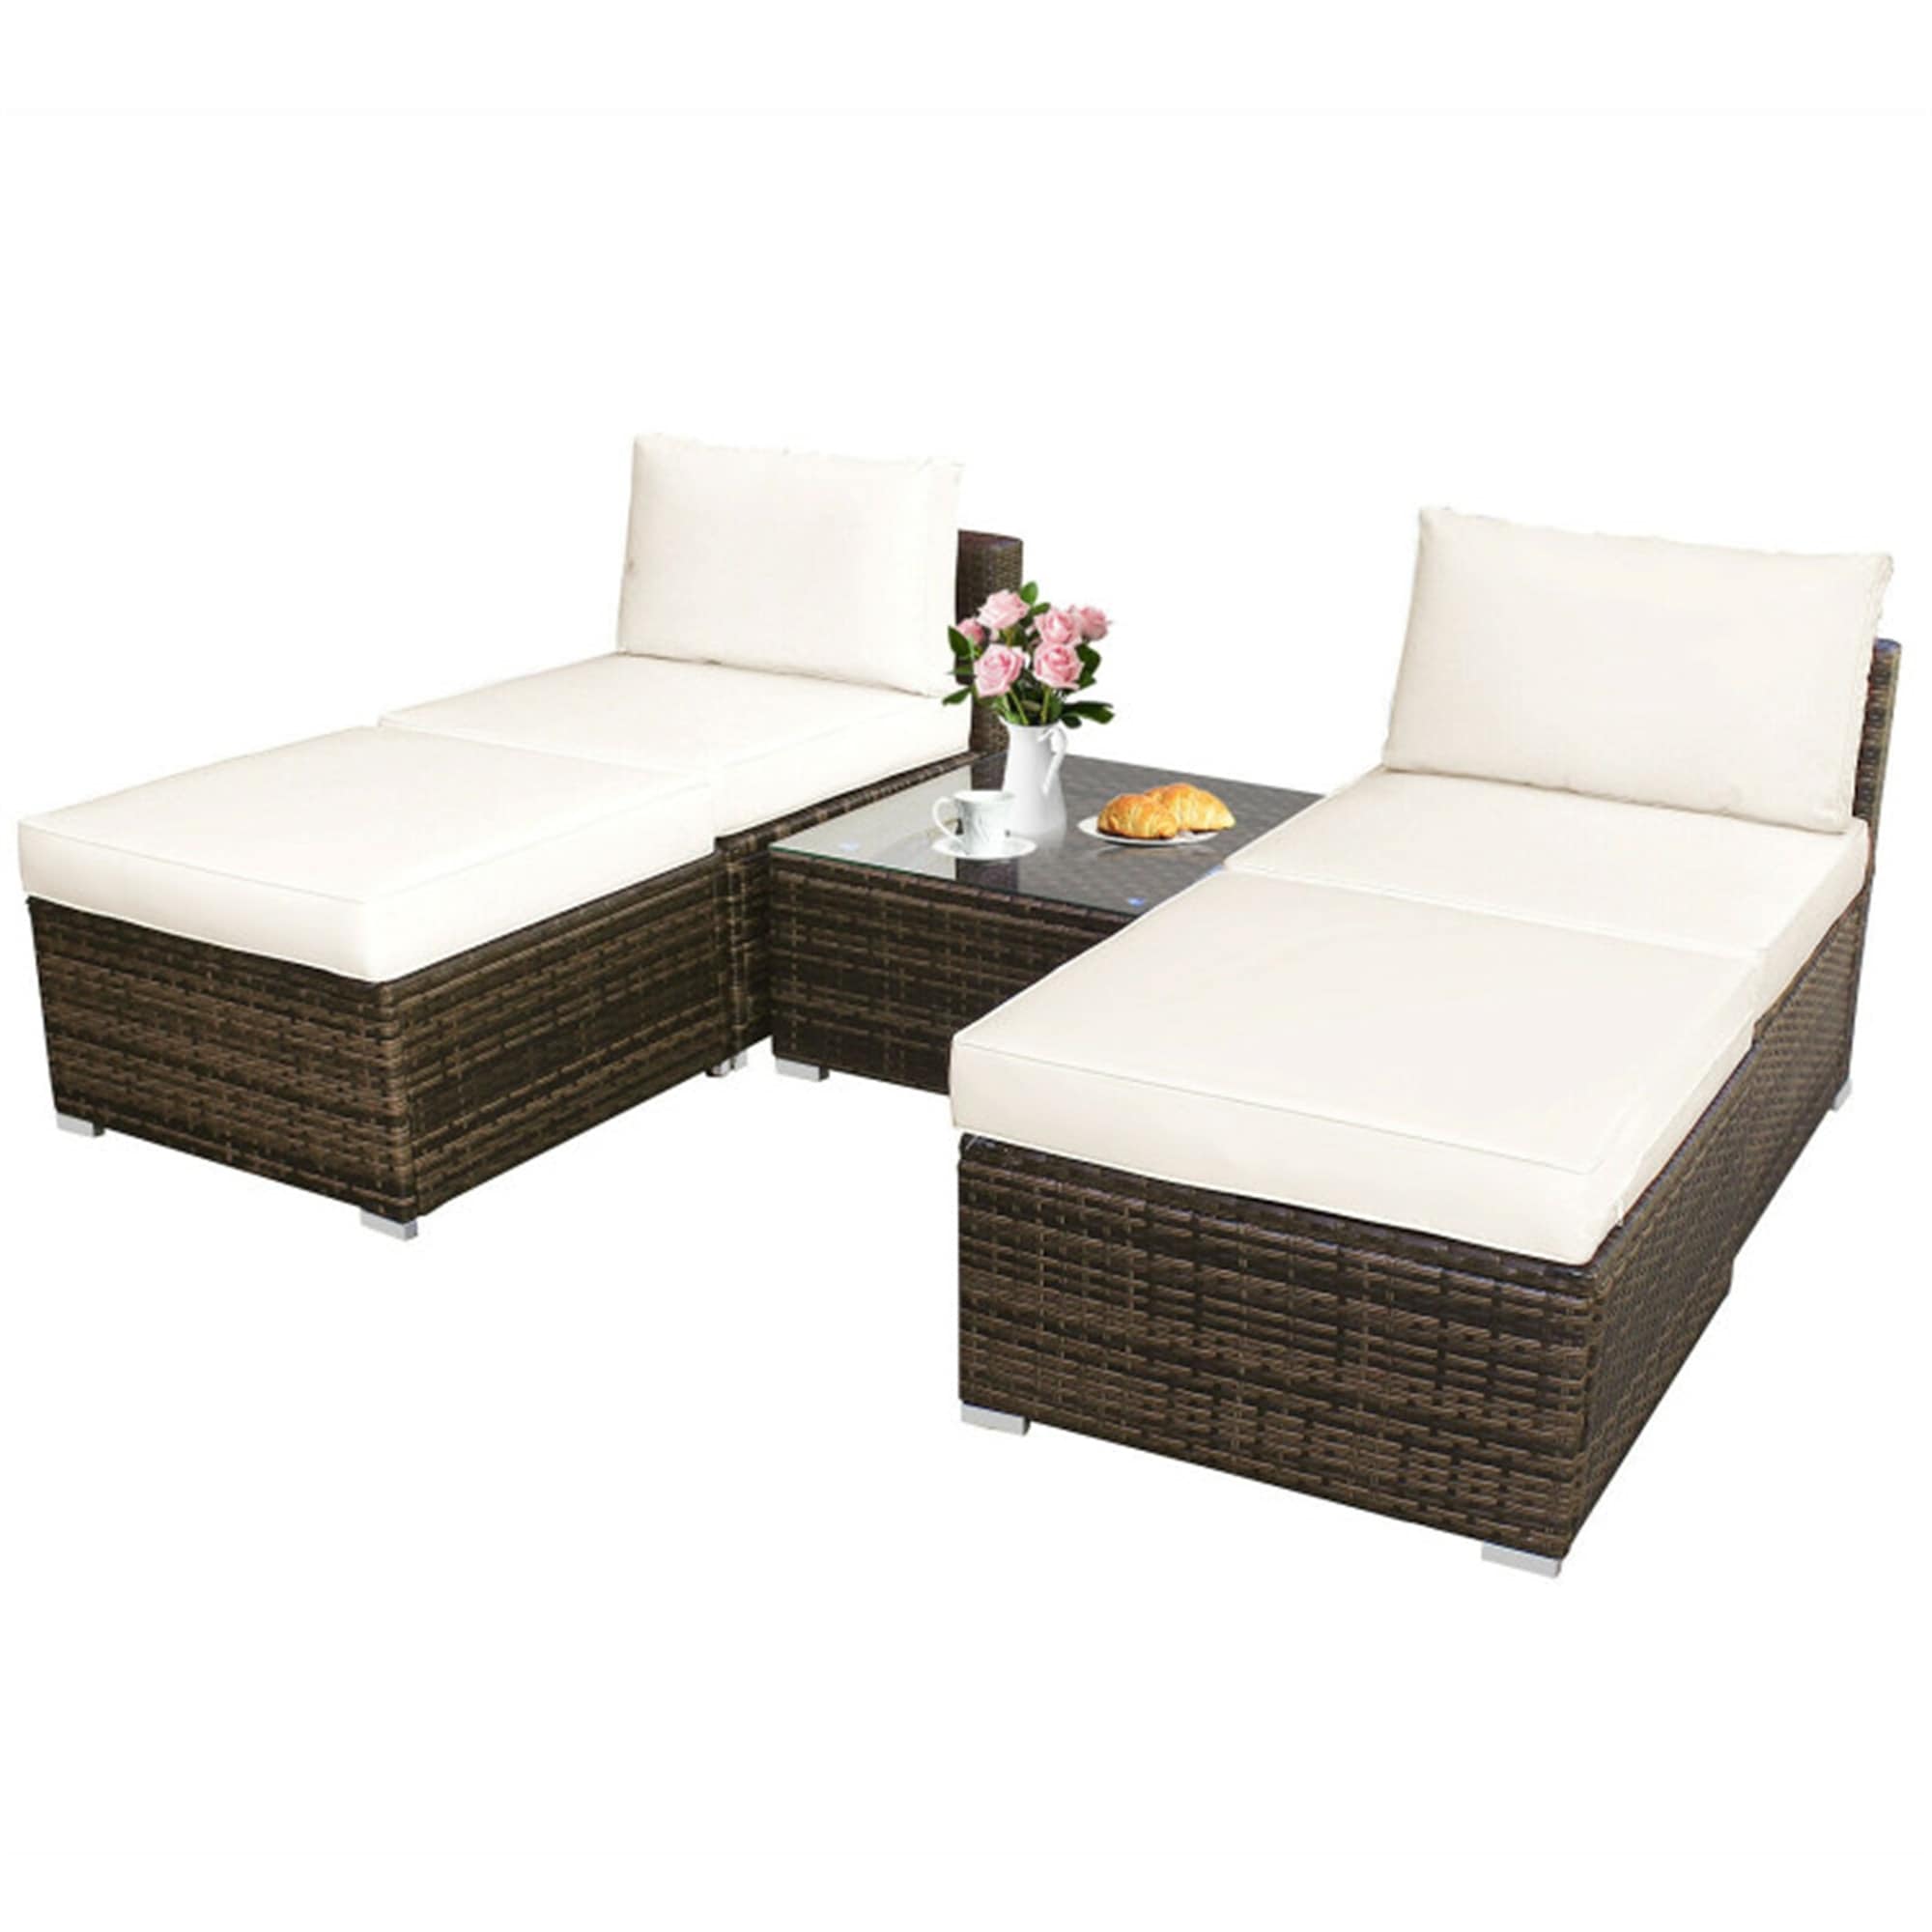 5-piece Patio Rattan Wicker Furniture Set With White Cushions